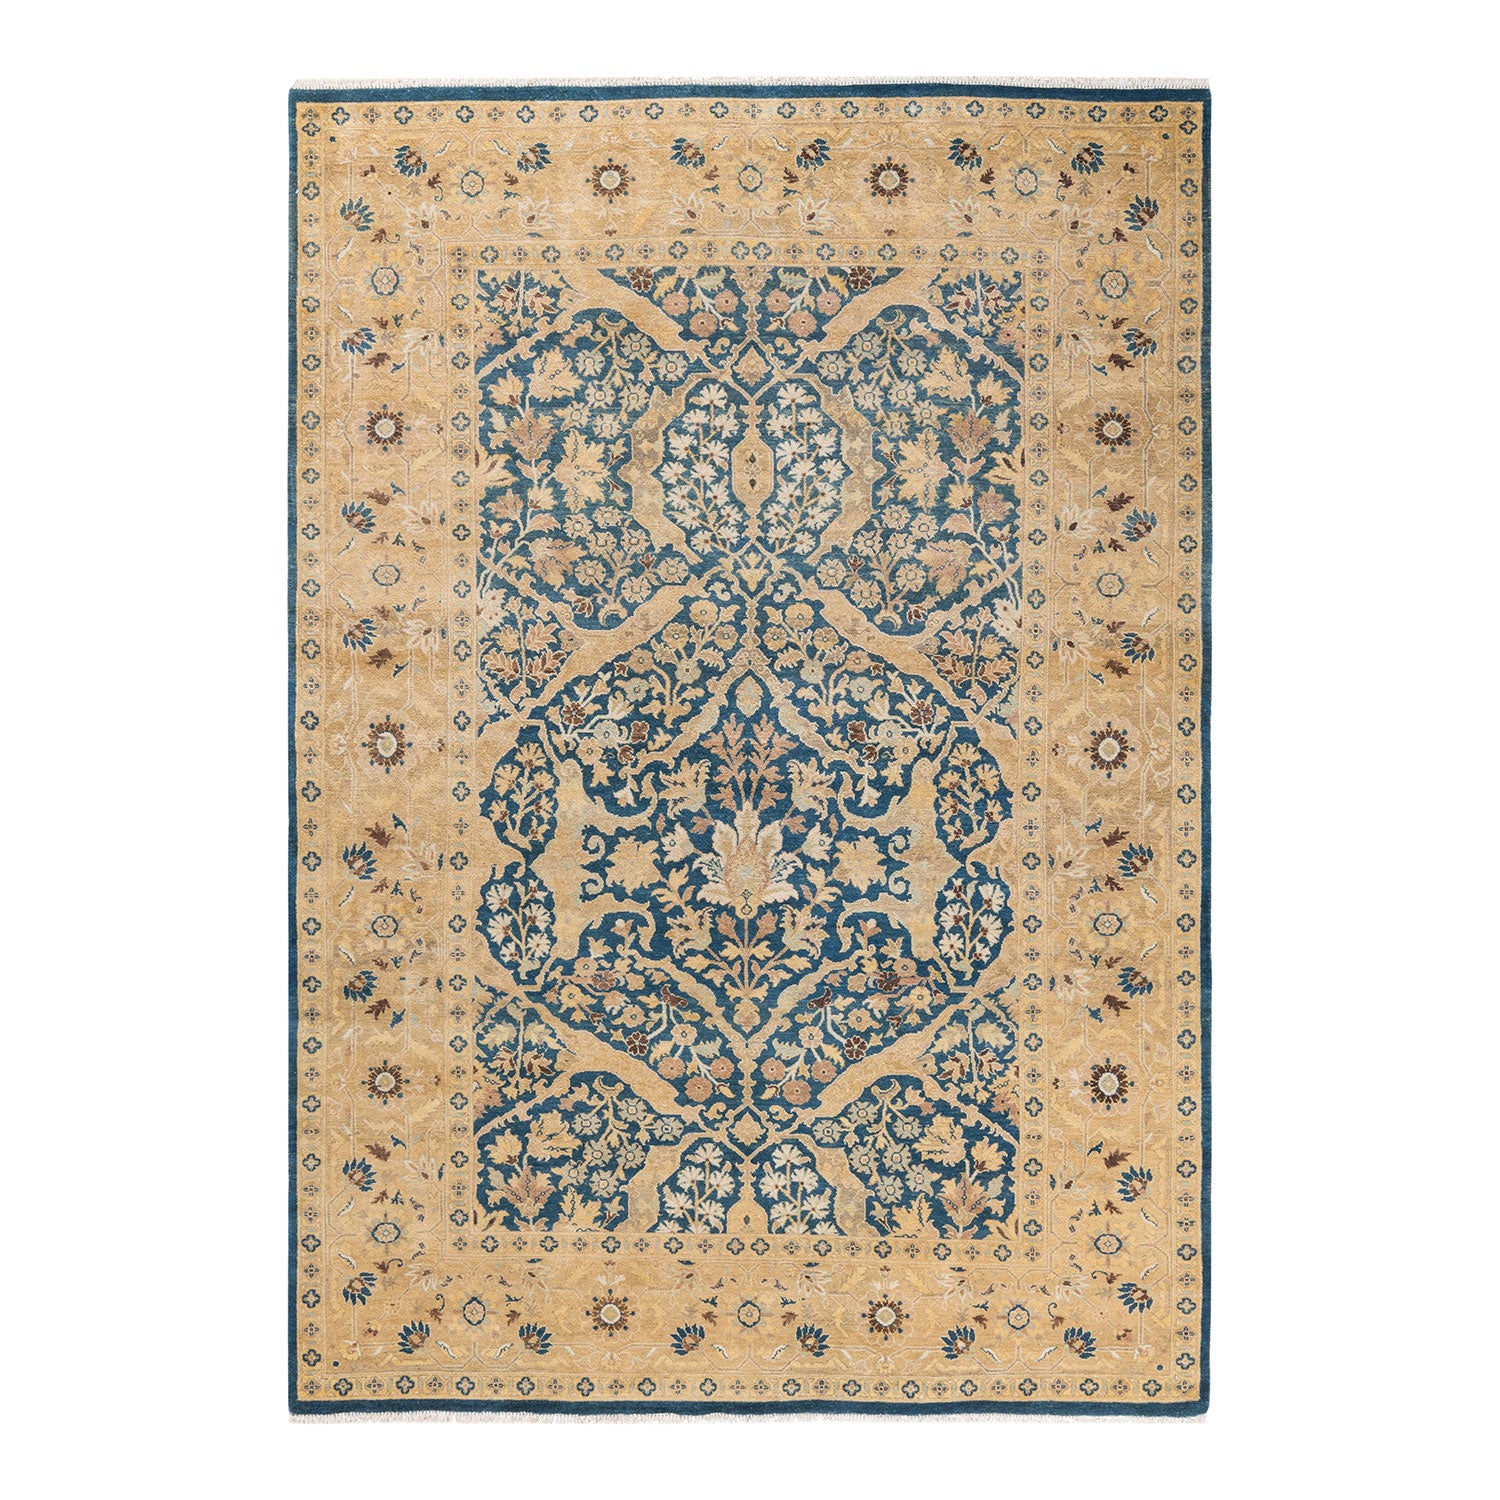 Exquisite Persian rug featuring intricate designs in shades of blue.